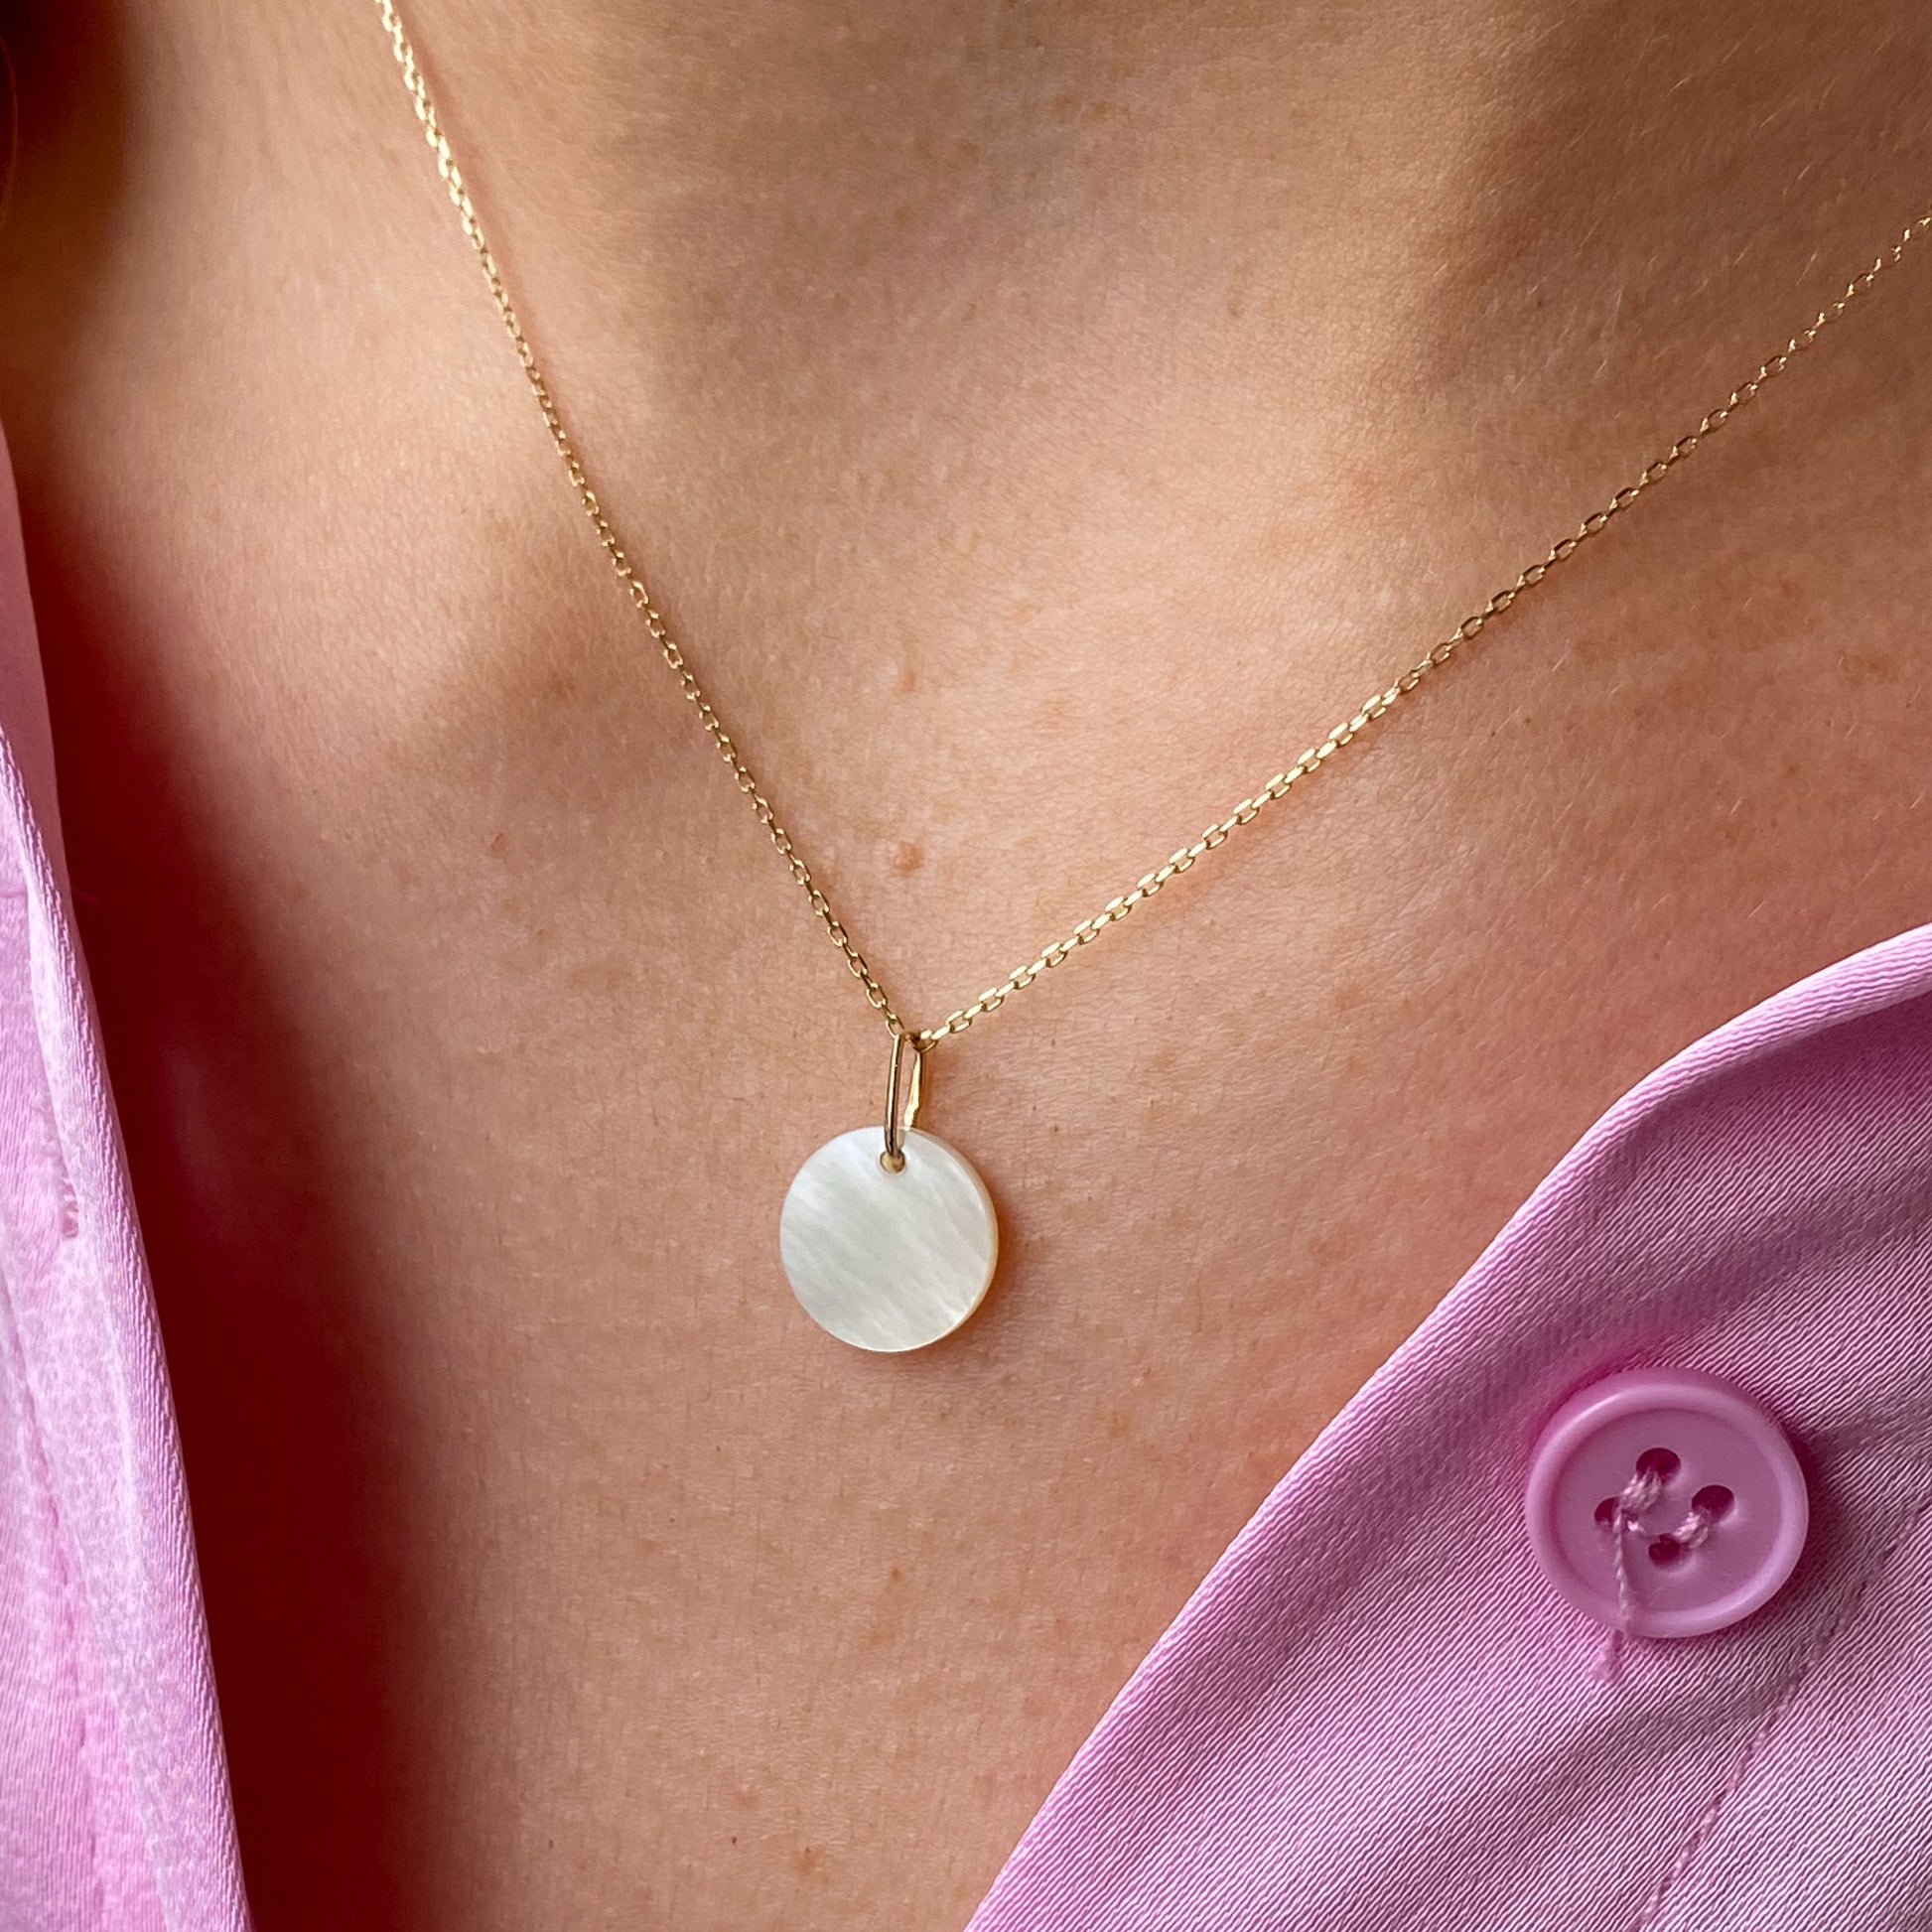 14ct Gold Mother of Pearl Disc Pendant Necklace - John Ross Jewellers